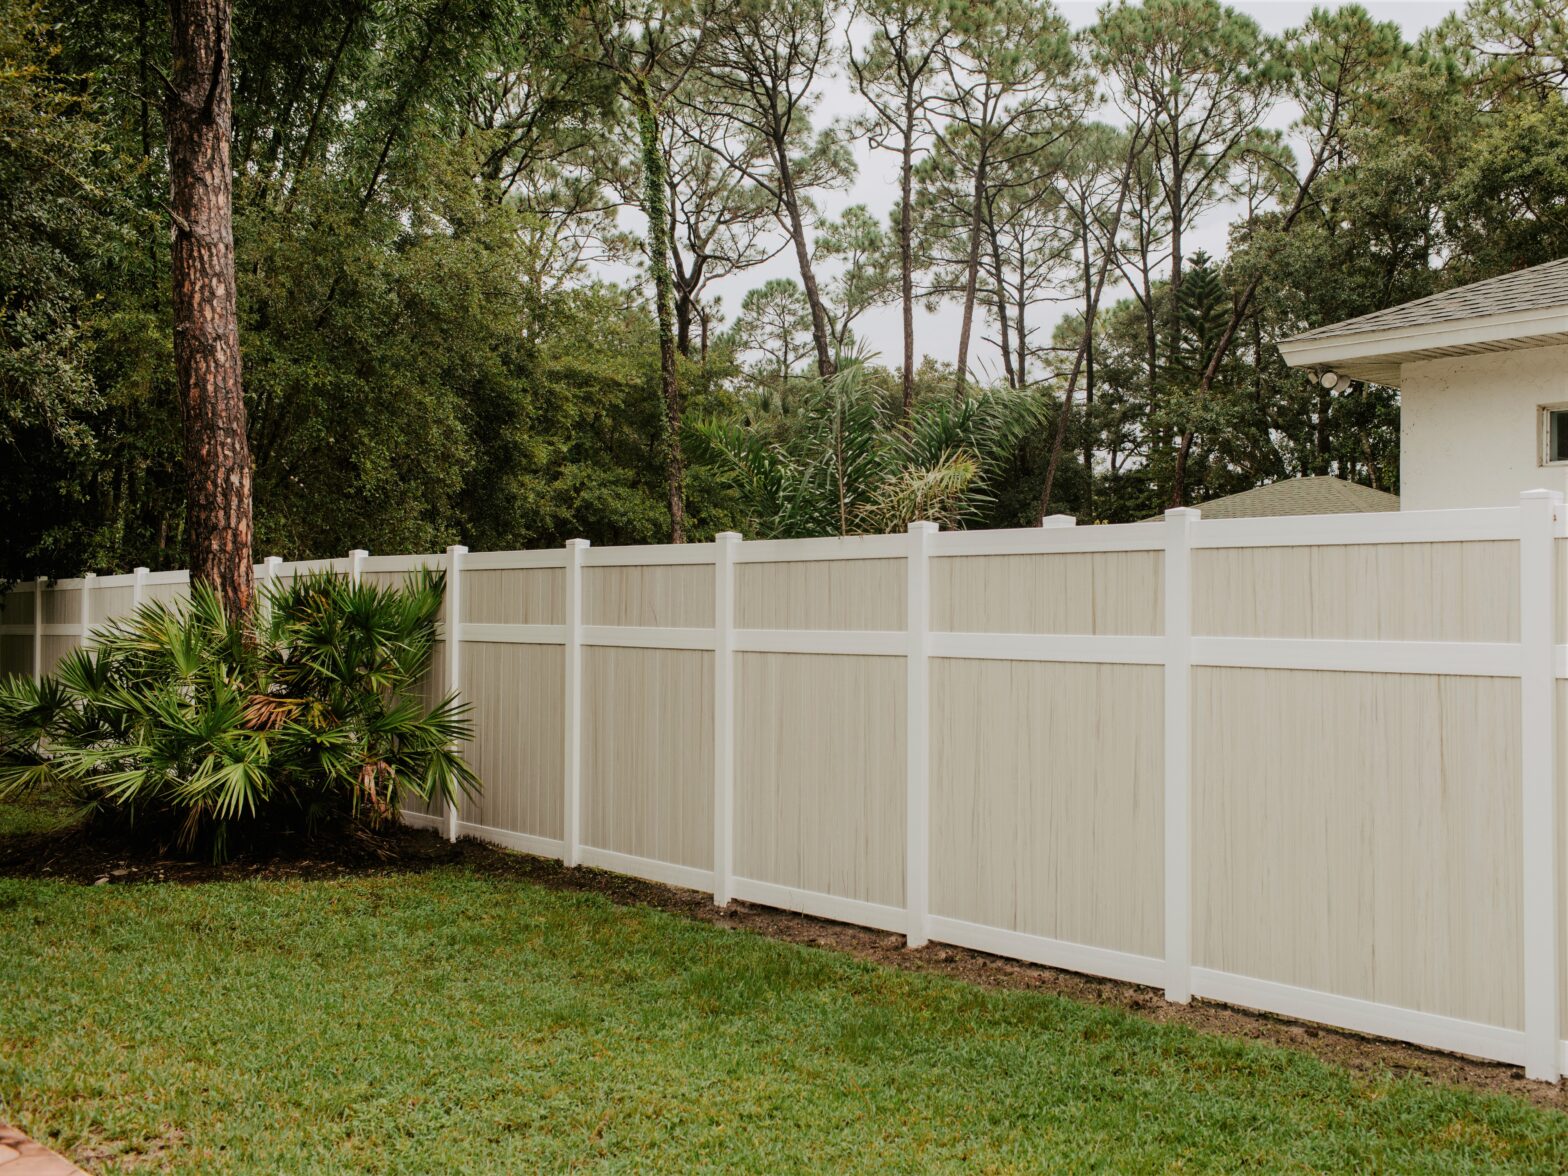 Photo of a vinyl privacy fence in Sarasota, Florida